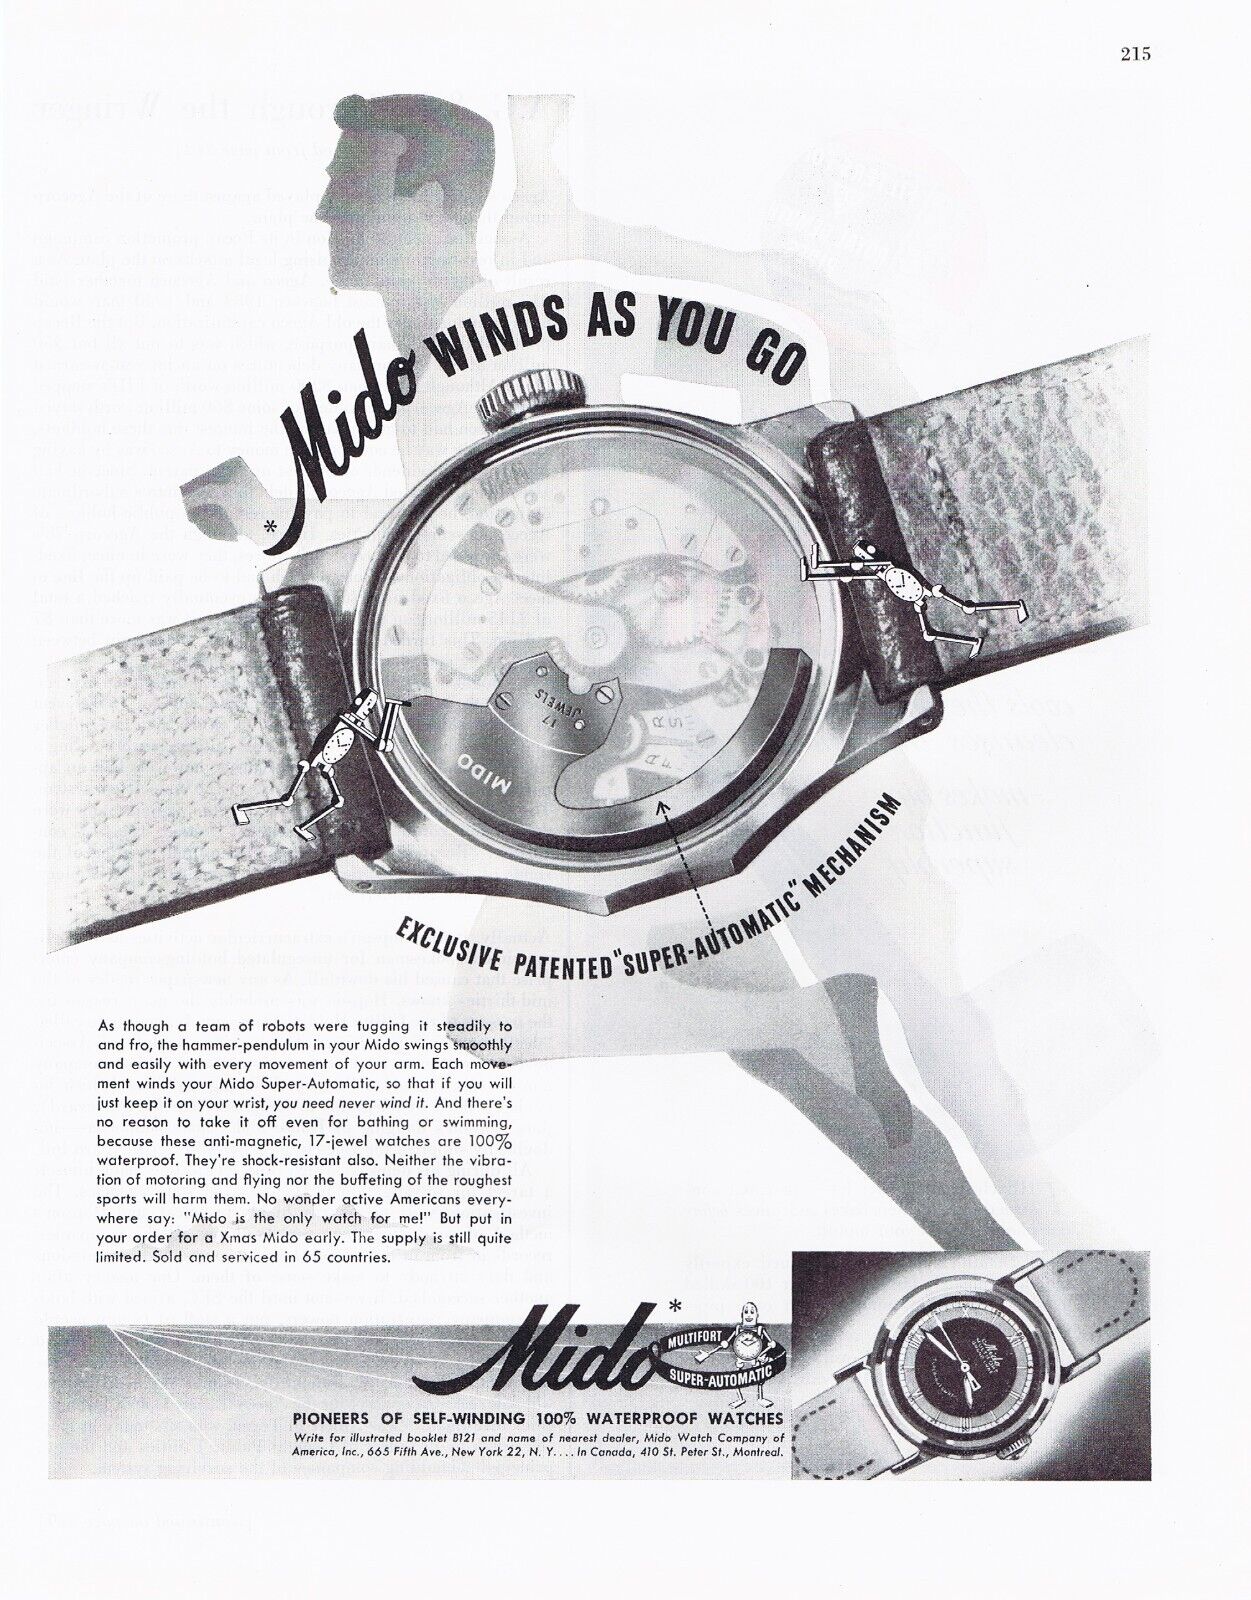 1945 MIDO SELF-WINDING SUPER-AUTOMATIC WATCH AD Vintage Sports Watch, Montreal